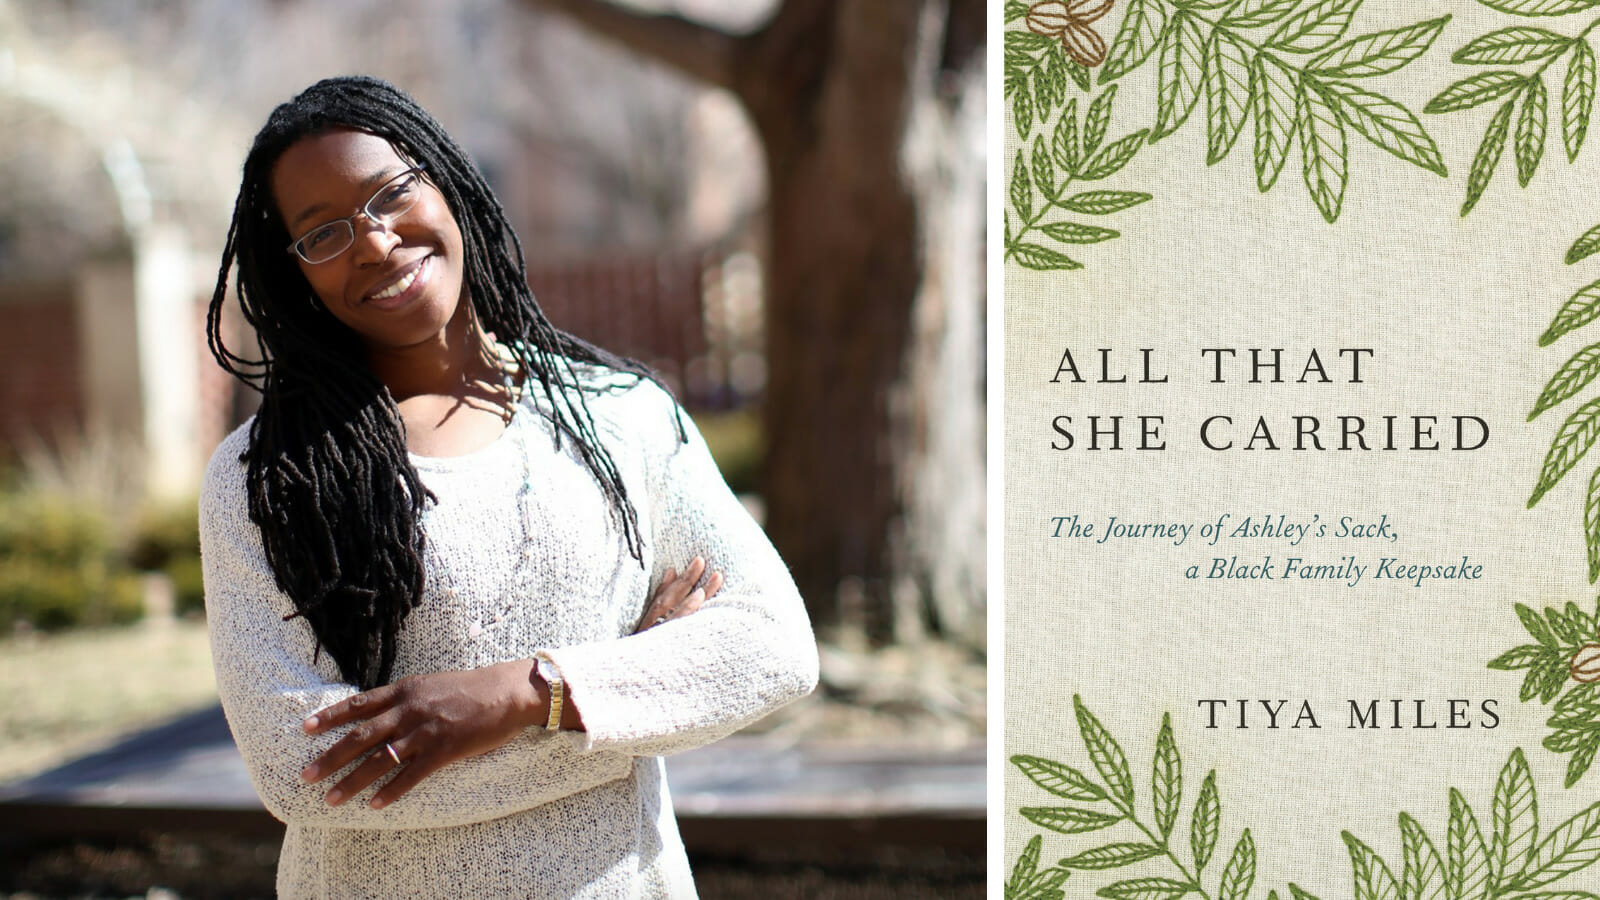 Photo of Tiya Miles and cover of book - All That She Carried